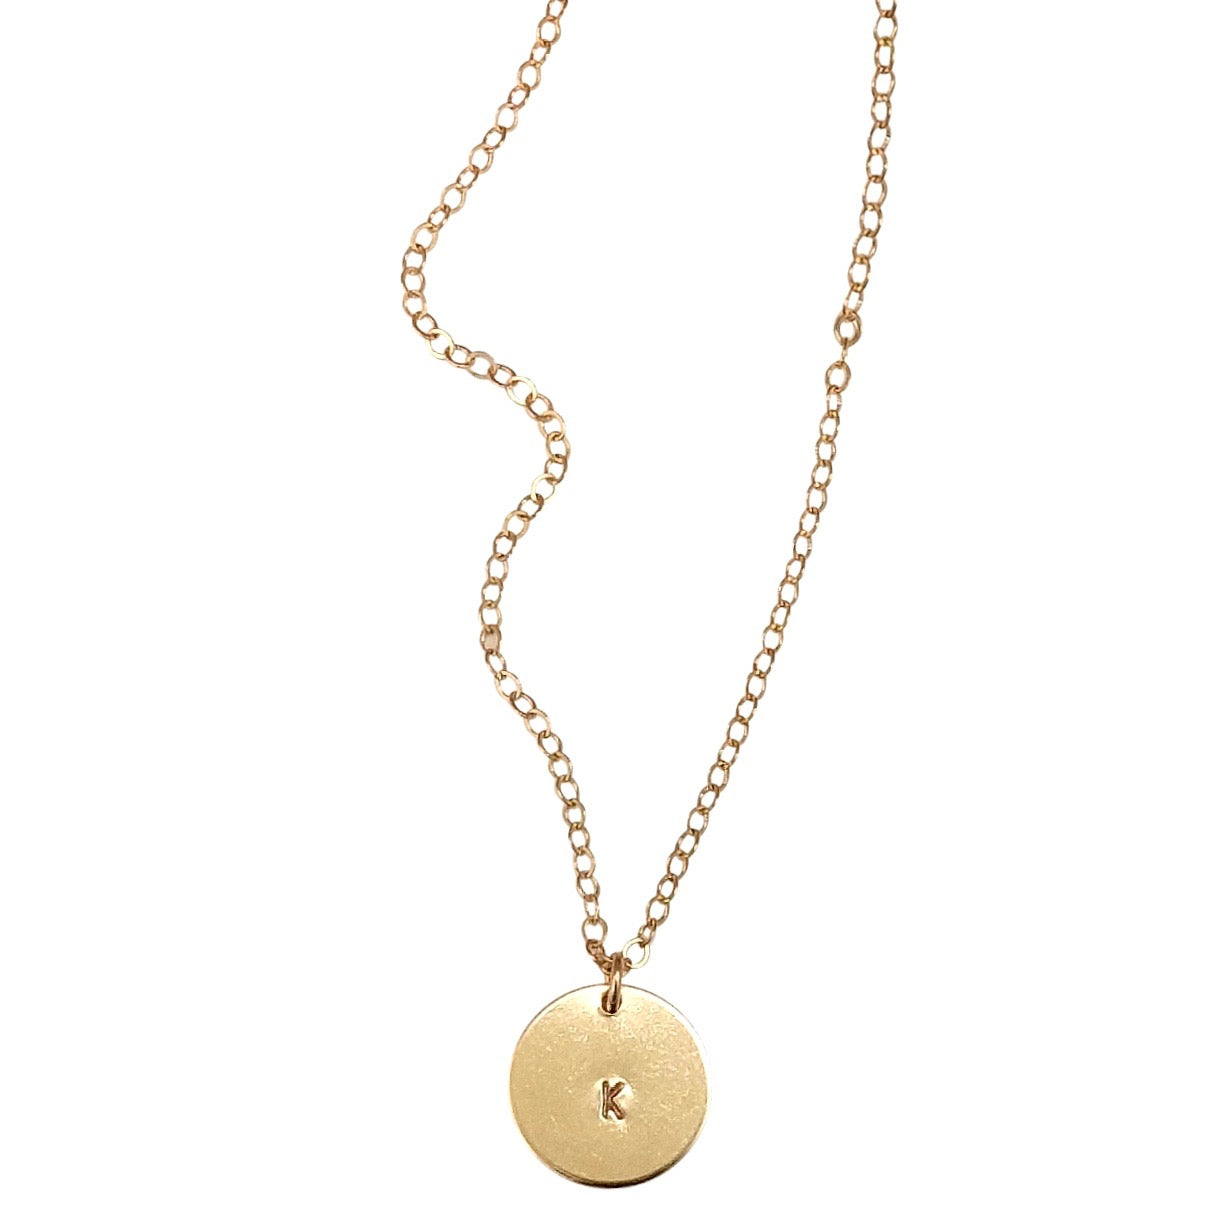 Personalised gold disc necklace